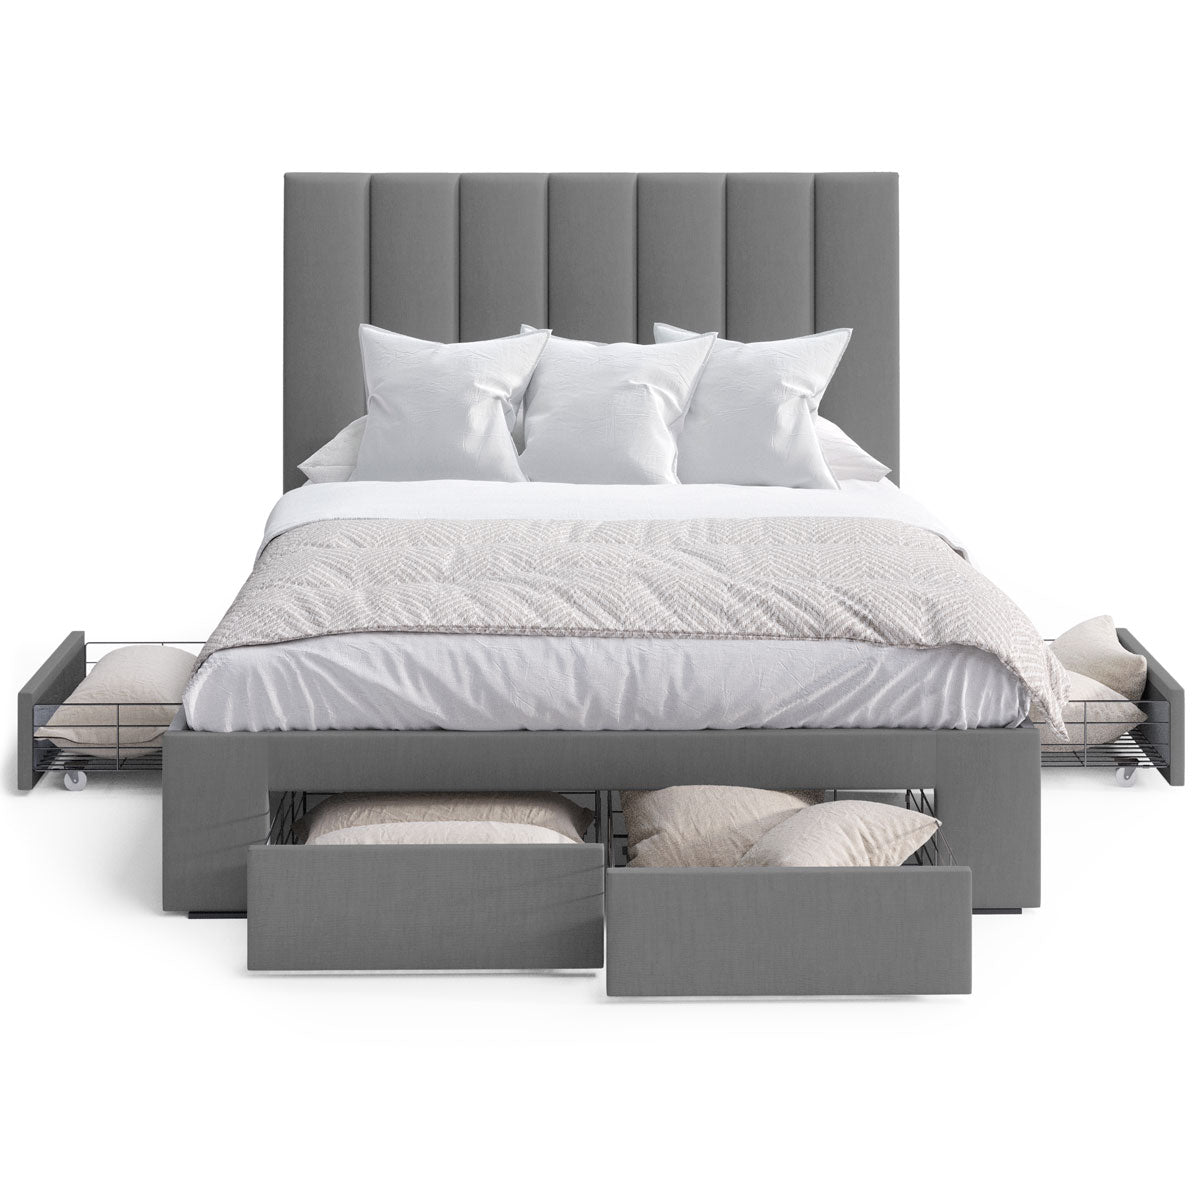 Celine Bed Frame with Four Extra Large Drawers (Charcoal Fabric)